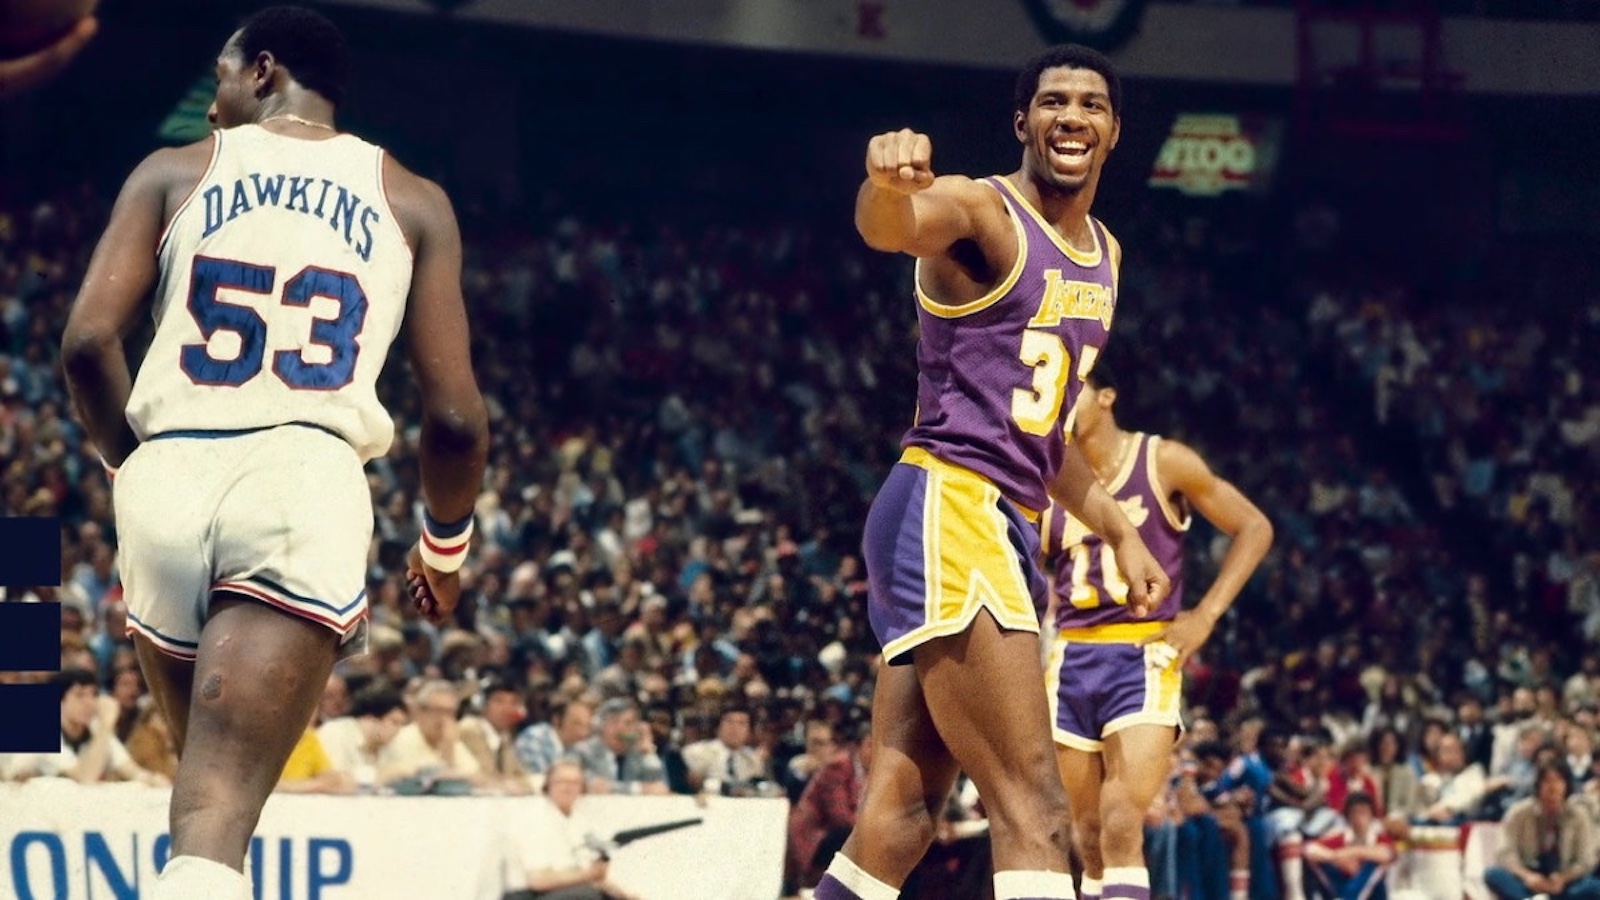 Justin Kubatko on X: 📅 On this day in 1975, the @Lakers Kareem Abdul- Jabbar had 29 points, 21 rebounds, and 11 blocks in a win over the Pistons.  Since the NBA started